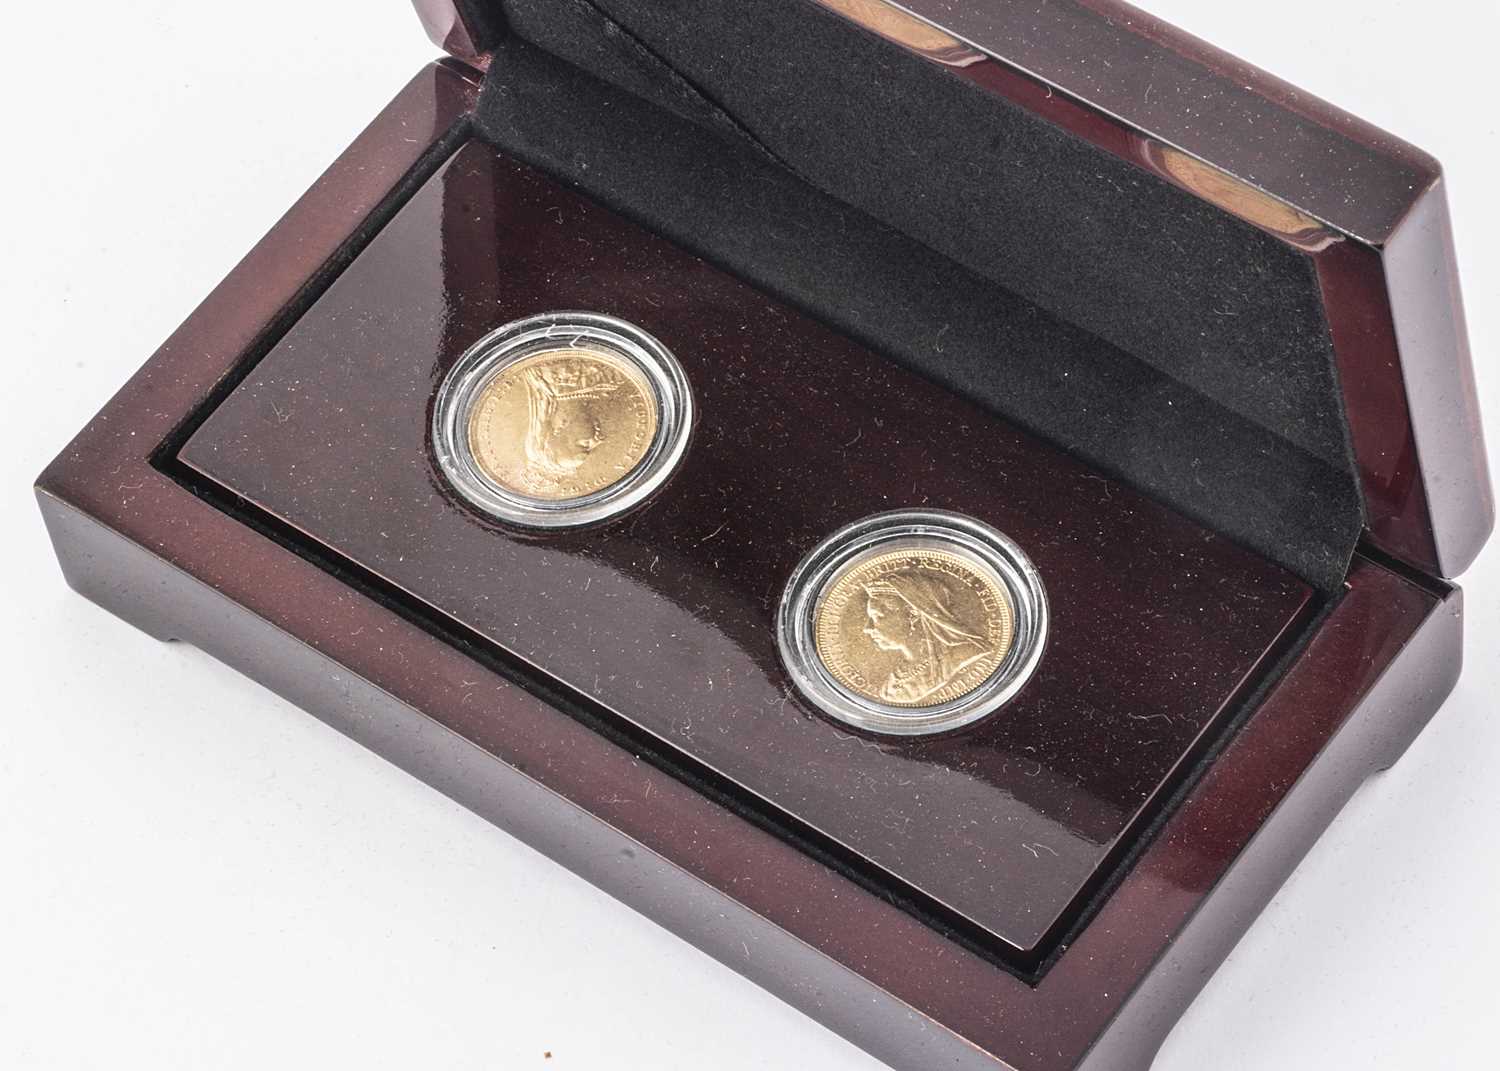 Lot 20 - Two Victorian gold full sovereigns